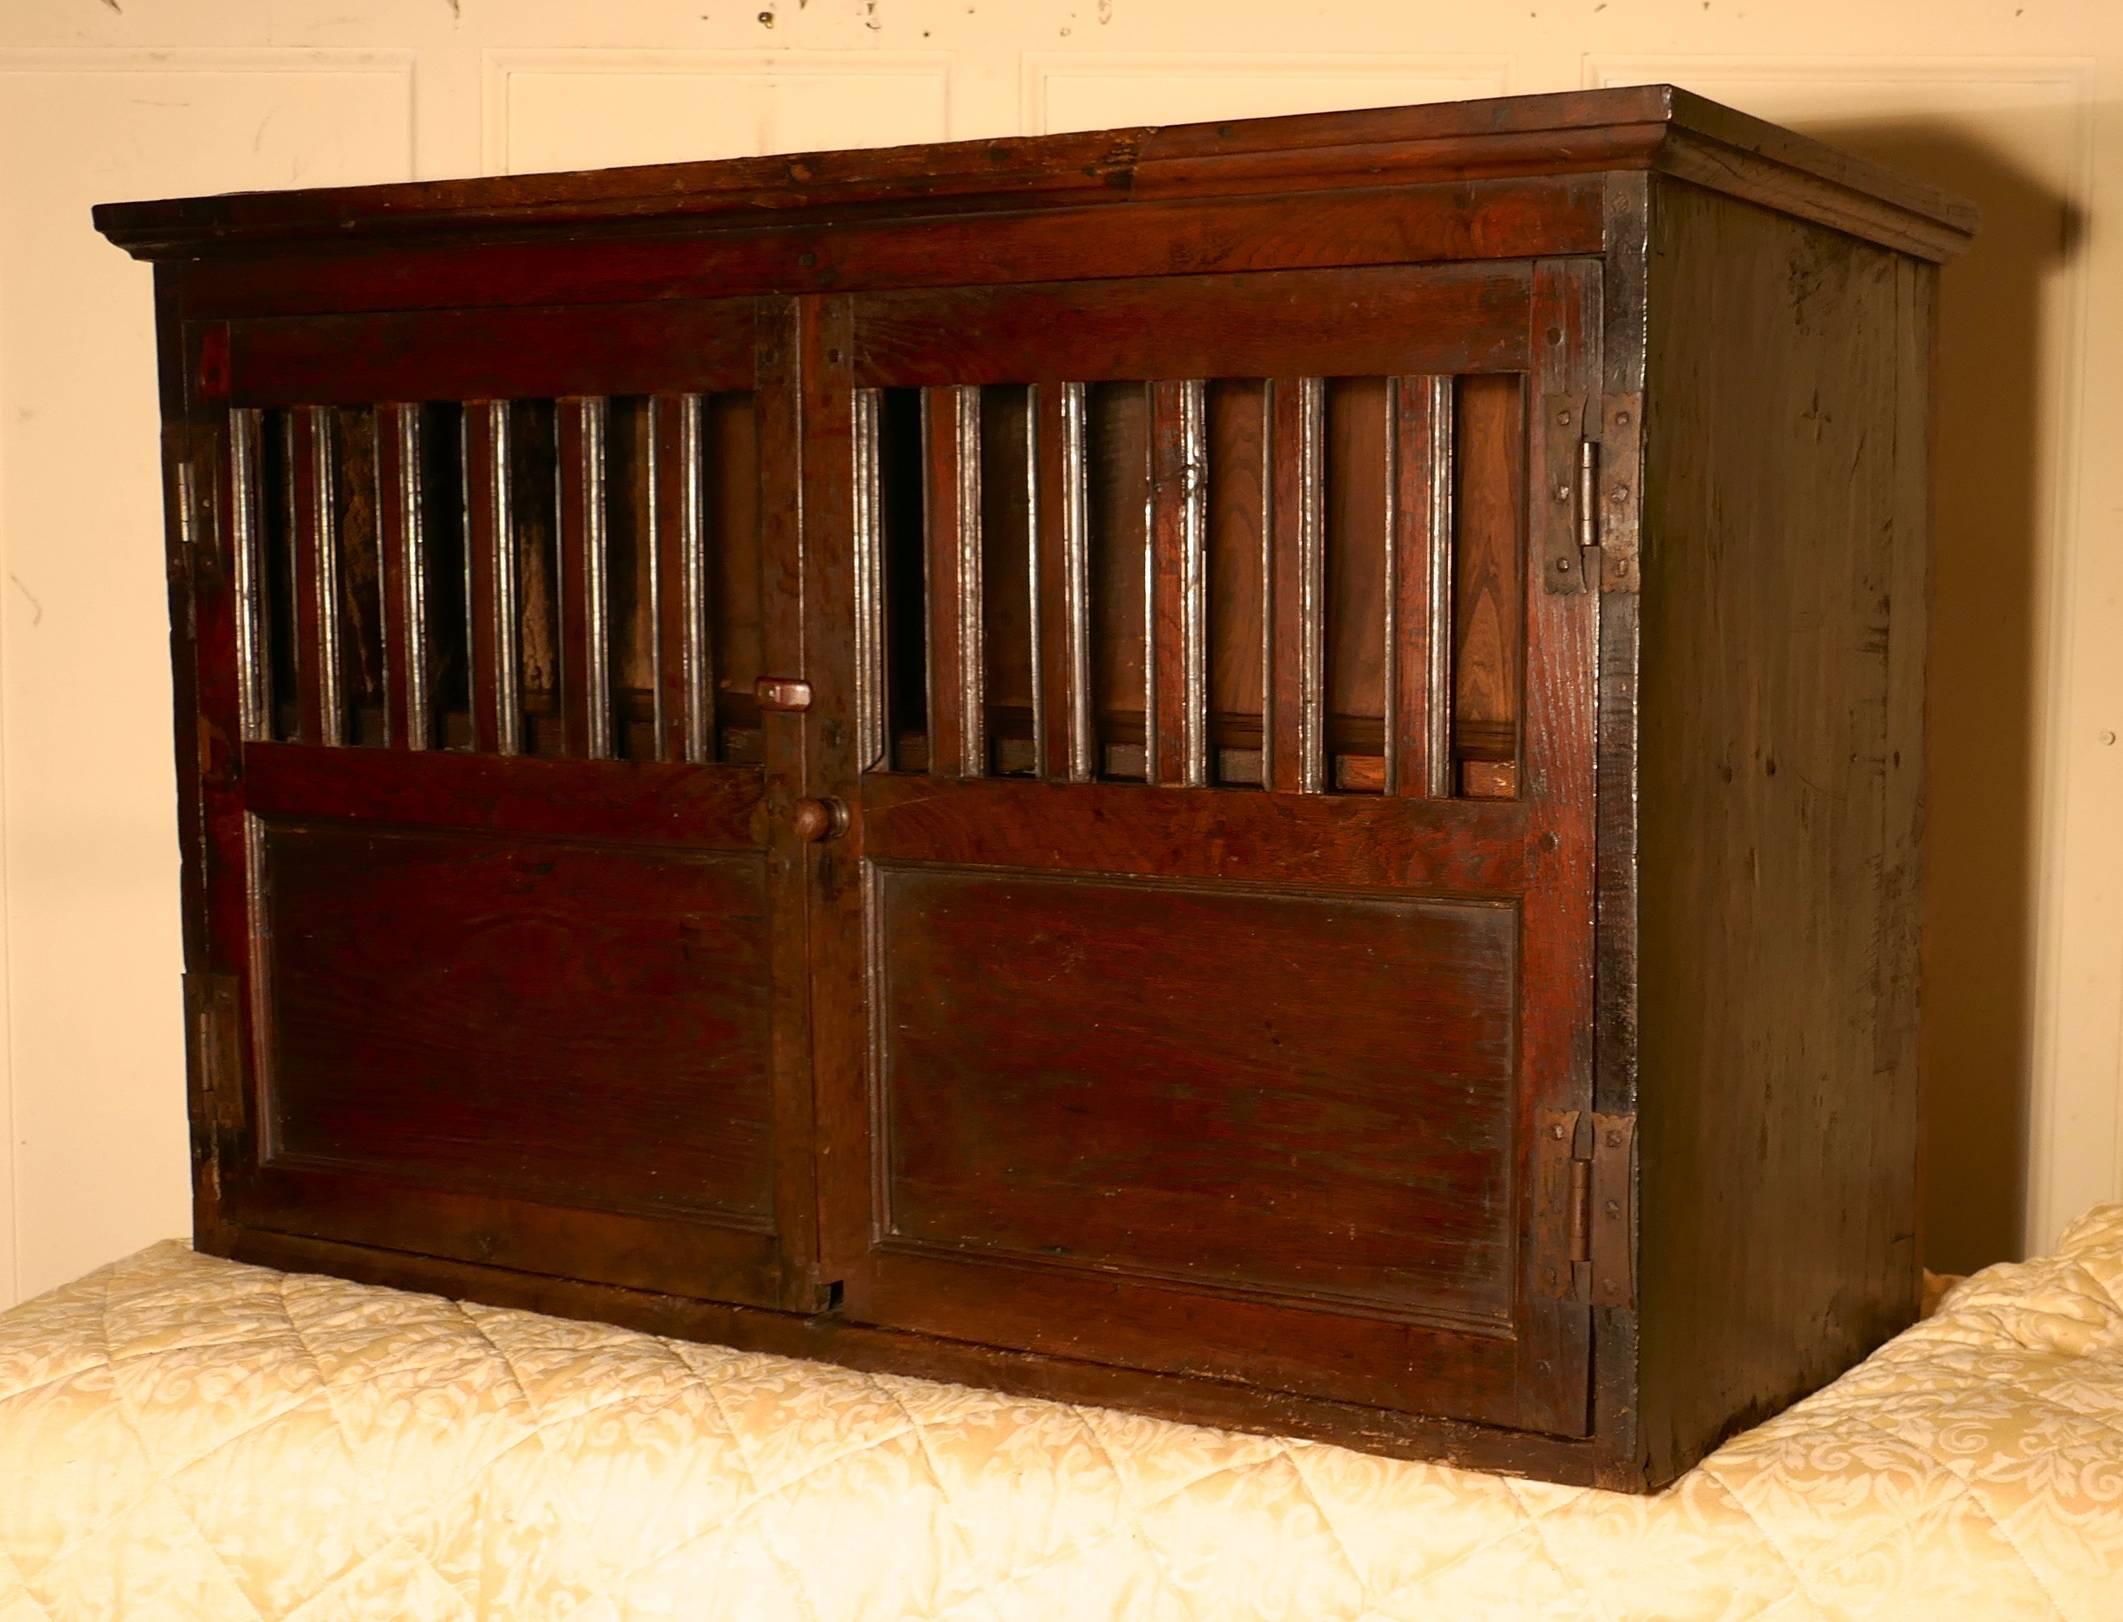 17th century antique oak food cupboard, bread hutch

This is a lovely Georgian country antique cupboard, the upper part of the doors are slatted to allow the free movement of air, inside there is a full length shelf, so all that is needed to keep